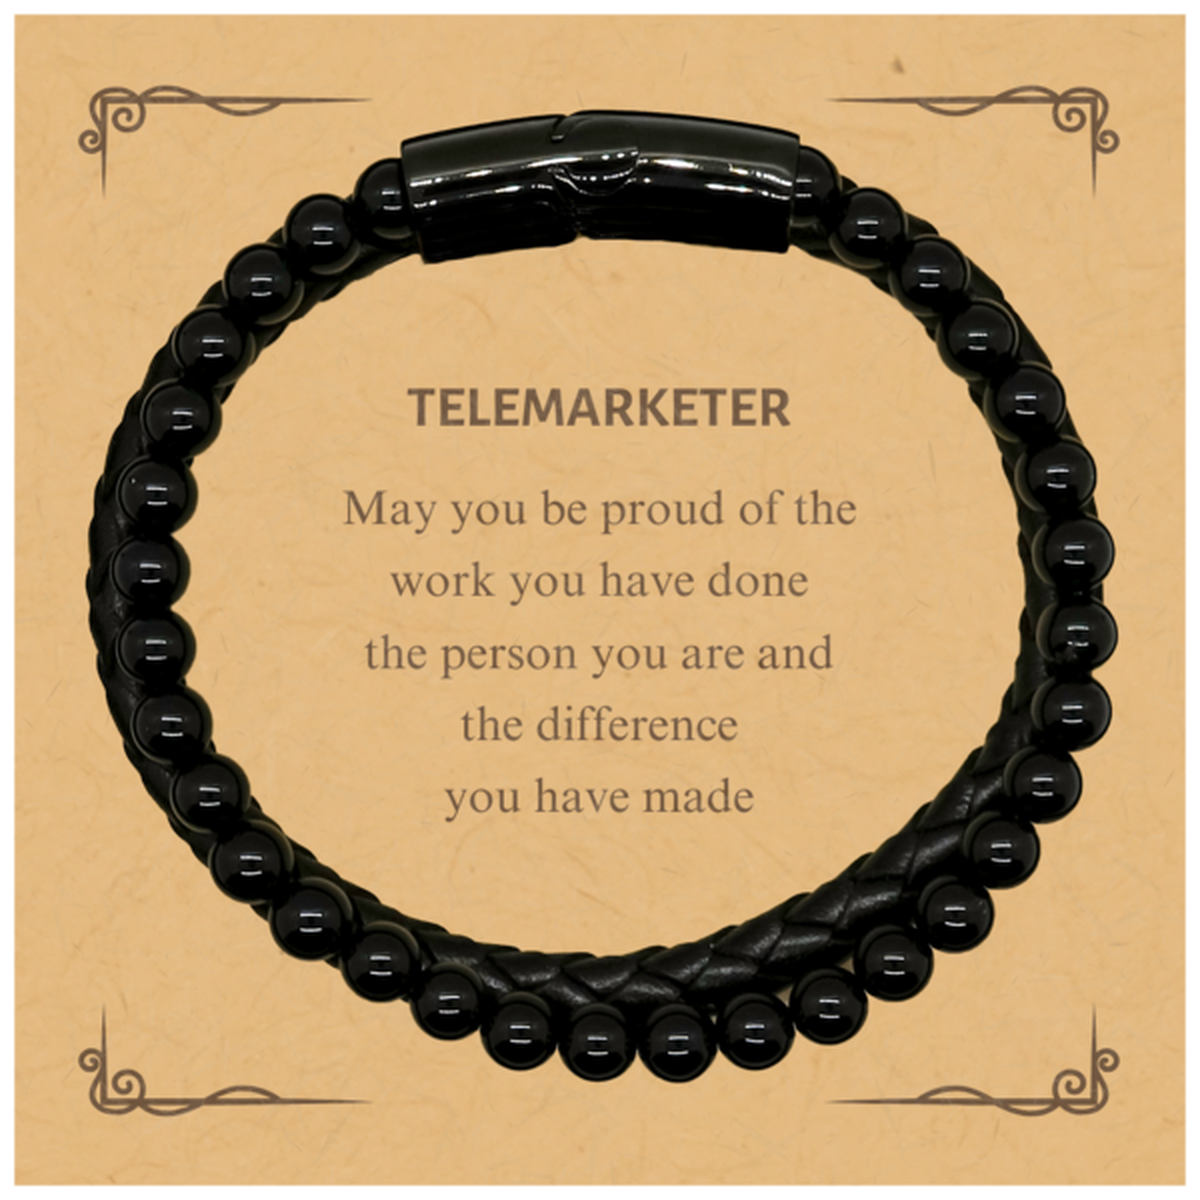 Telemarketer May you be proud of the work you have done, Retirement Telemarketer Stone Leather Bracelets for Colleague Appreciation Gifts Amazing for Telemarketer